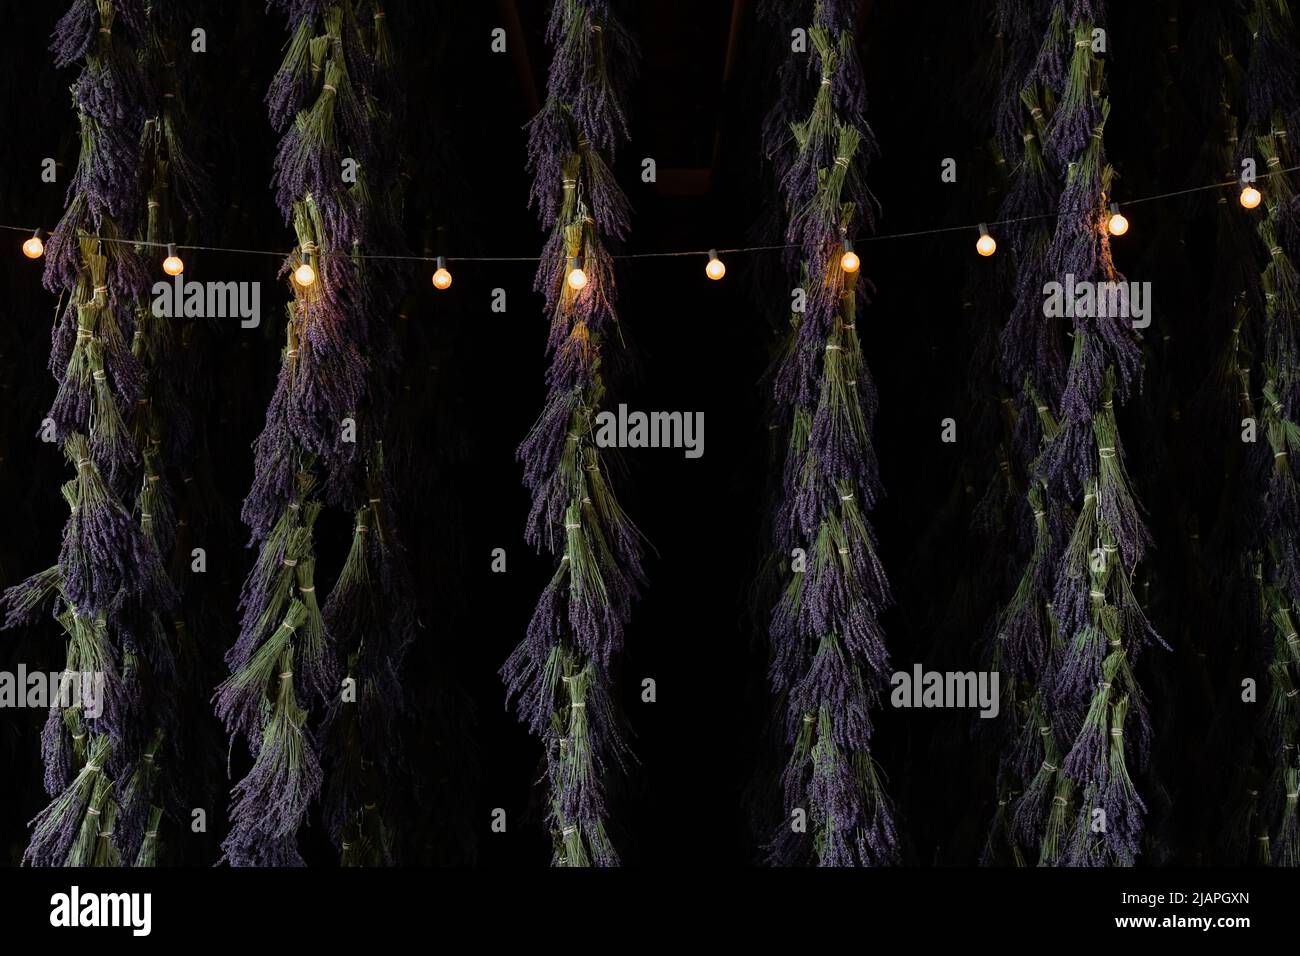 Bunches of Purple Lavender Hanging to Dry with String Lights Stock Photo